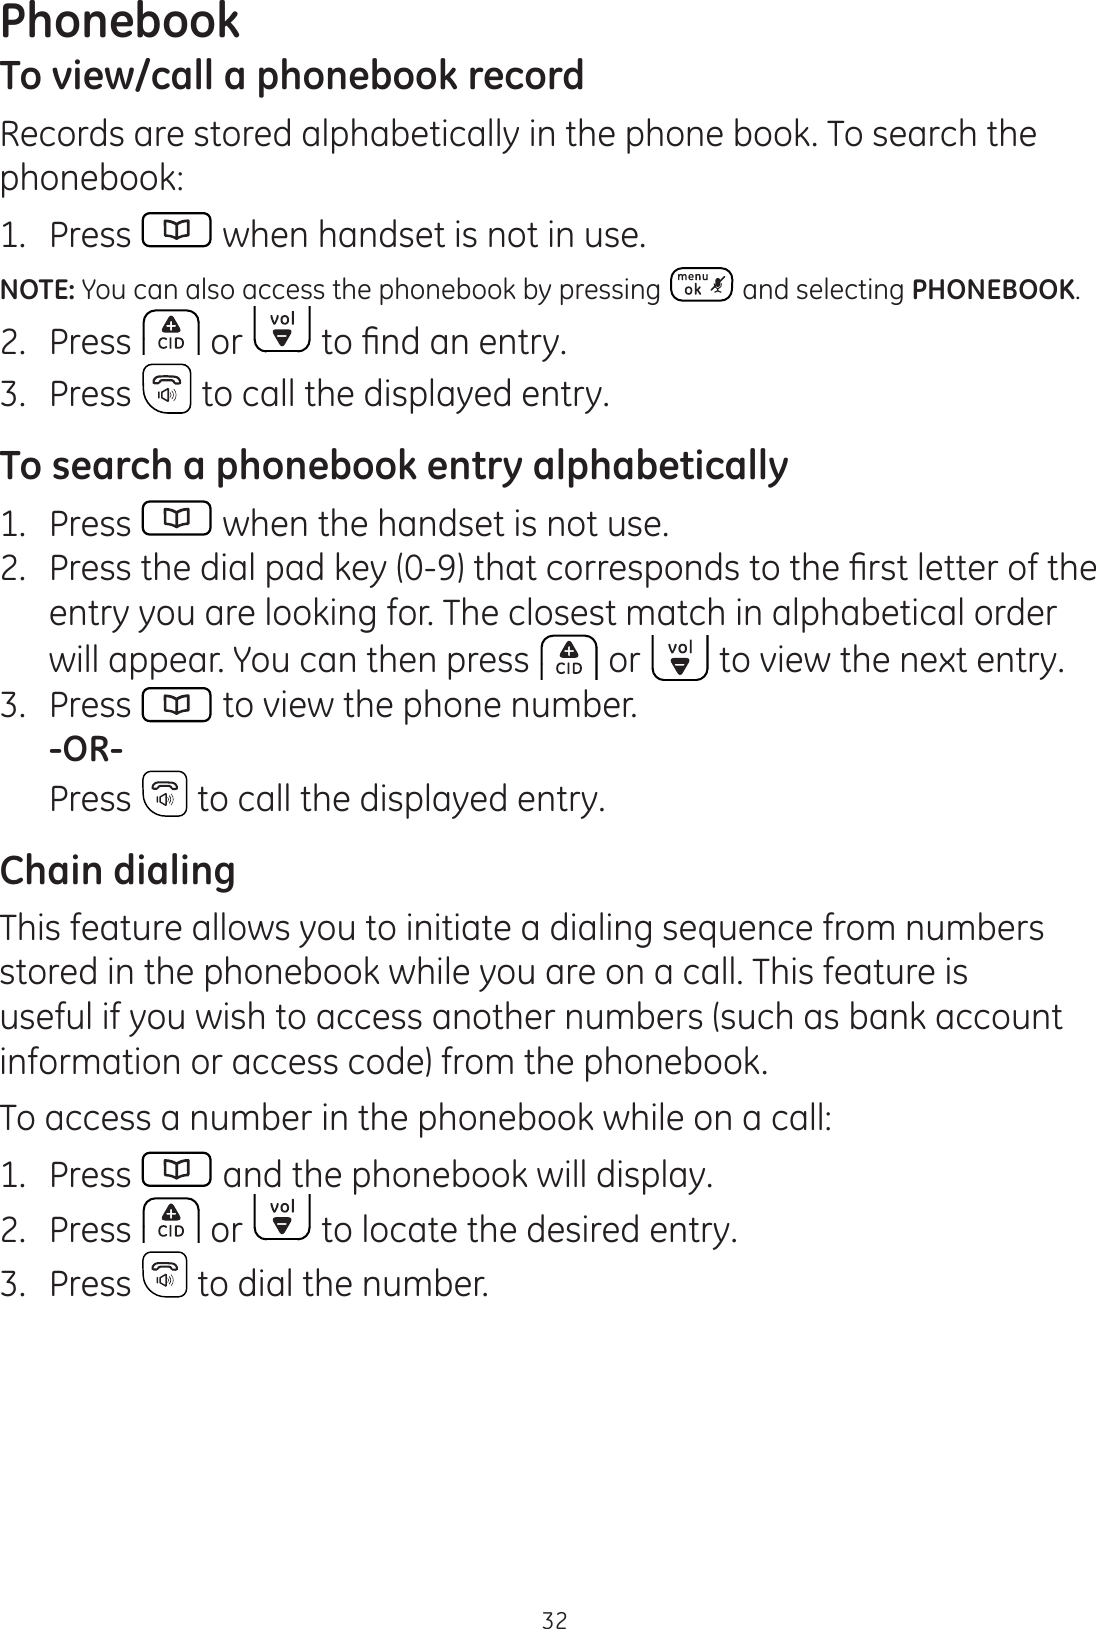 Phonebook32To view/call a phonebook recordRecords are stored alphabetically in the phone book. To search the phonebook:1.  Press   when handset is not in use.NOTE: You can also access the phonebook by pressing  and selecting PHONEBOOK.2.  Press   or  WR¿QGDQHQWU\3.  Press   to call the displayed entry. To search a phonebook entry alphabetically1.  Press   when the handset is not use. 3UHVVWKHGLDOSDGNH\WKDWFRUUHVSRQGVWRWKH¿UVWOHWWHURIWKHentry you are looking for. The closest match in alphabetical order will appear. You can then press   or   to view the next entry.3.  Press   to view the phone number. -OR-  Press   to call the displayed entry.Chain dialingThis feature allows you to initiate a dialing sequence from numbers stored in the phonebook while you are on a call. This feature is useful if you wish to access another numbers (such as bank account information or access code) from the phonebook. To access a number in the phonebook while on a call:1.  Press   and the phonebook will display.2.  Press   or   to locate the desired entry.3.  Press   to dial the number.